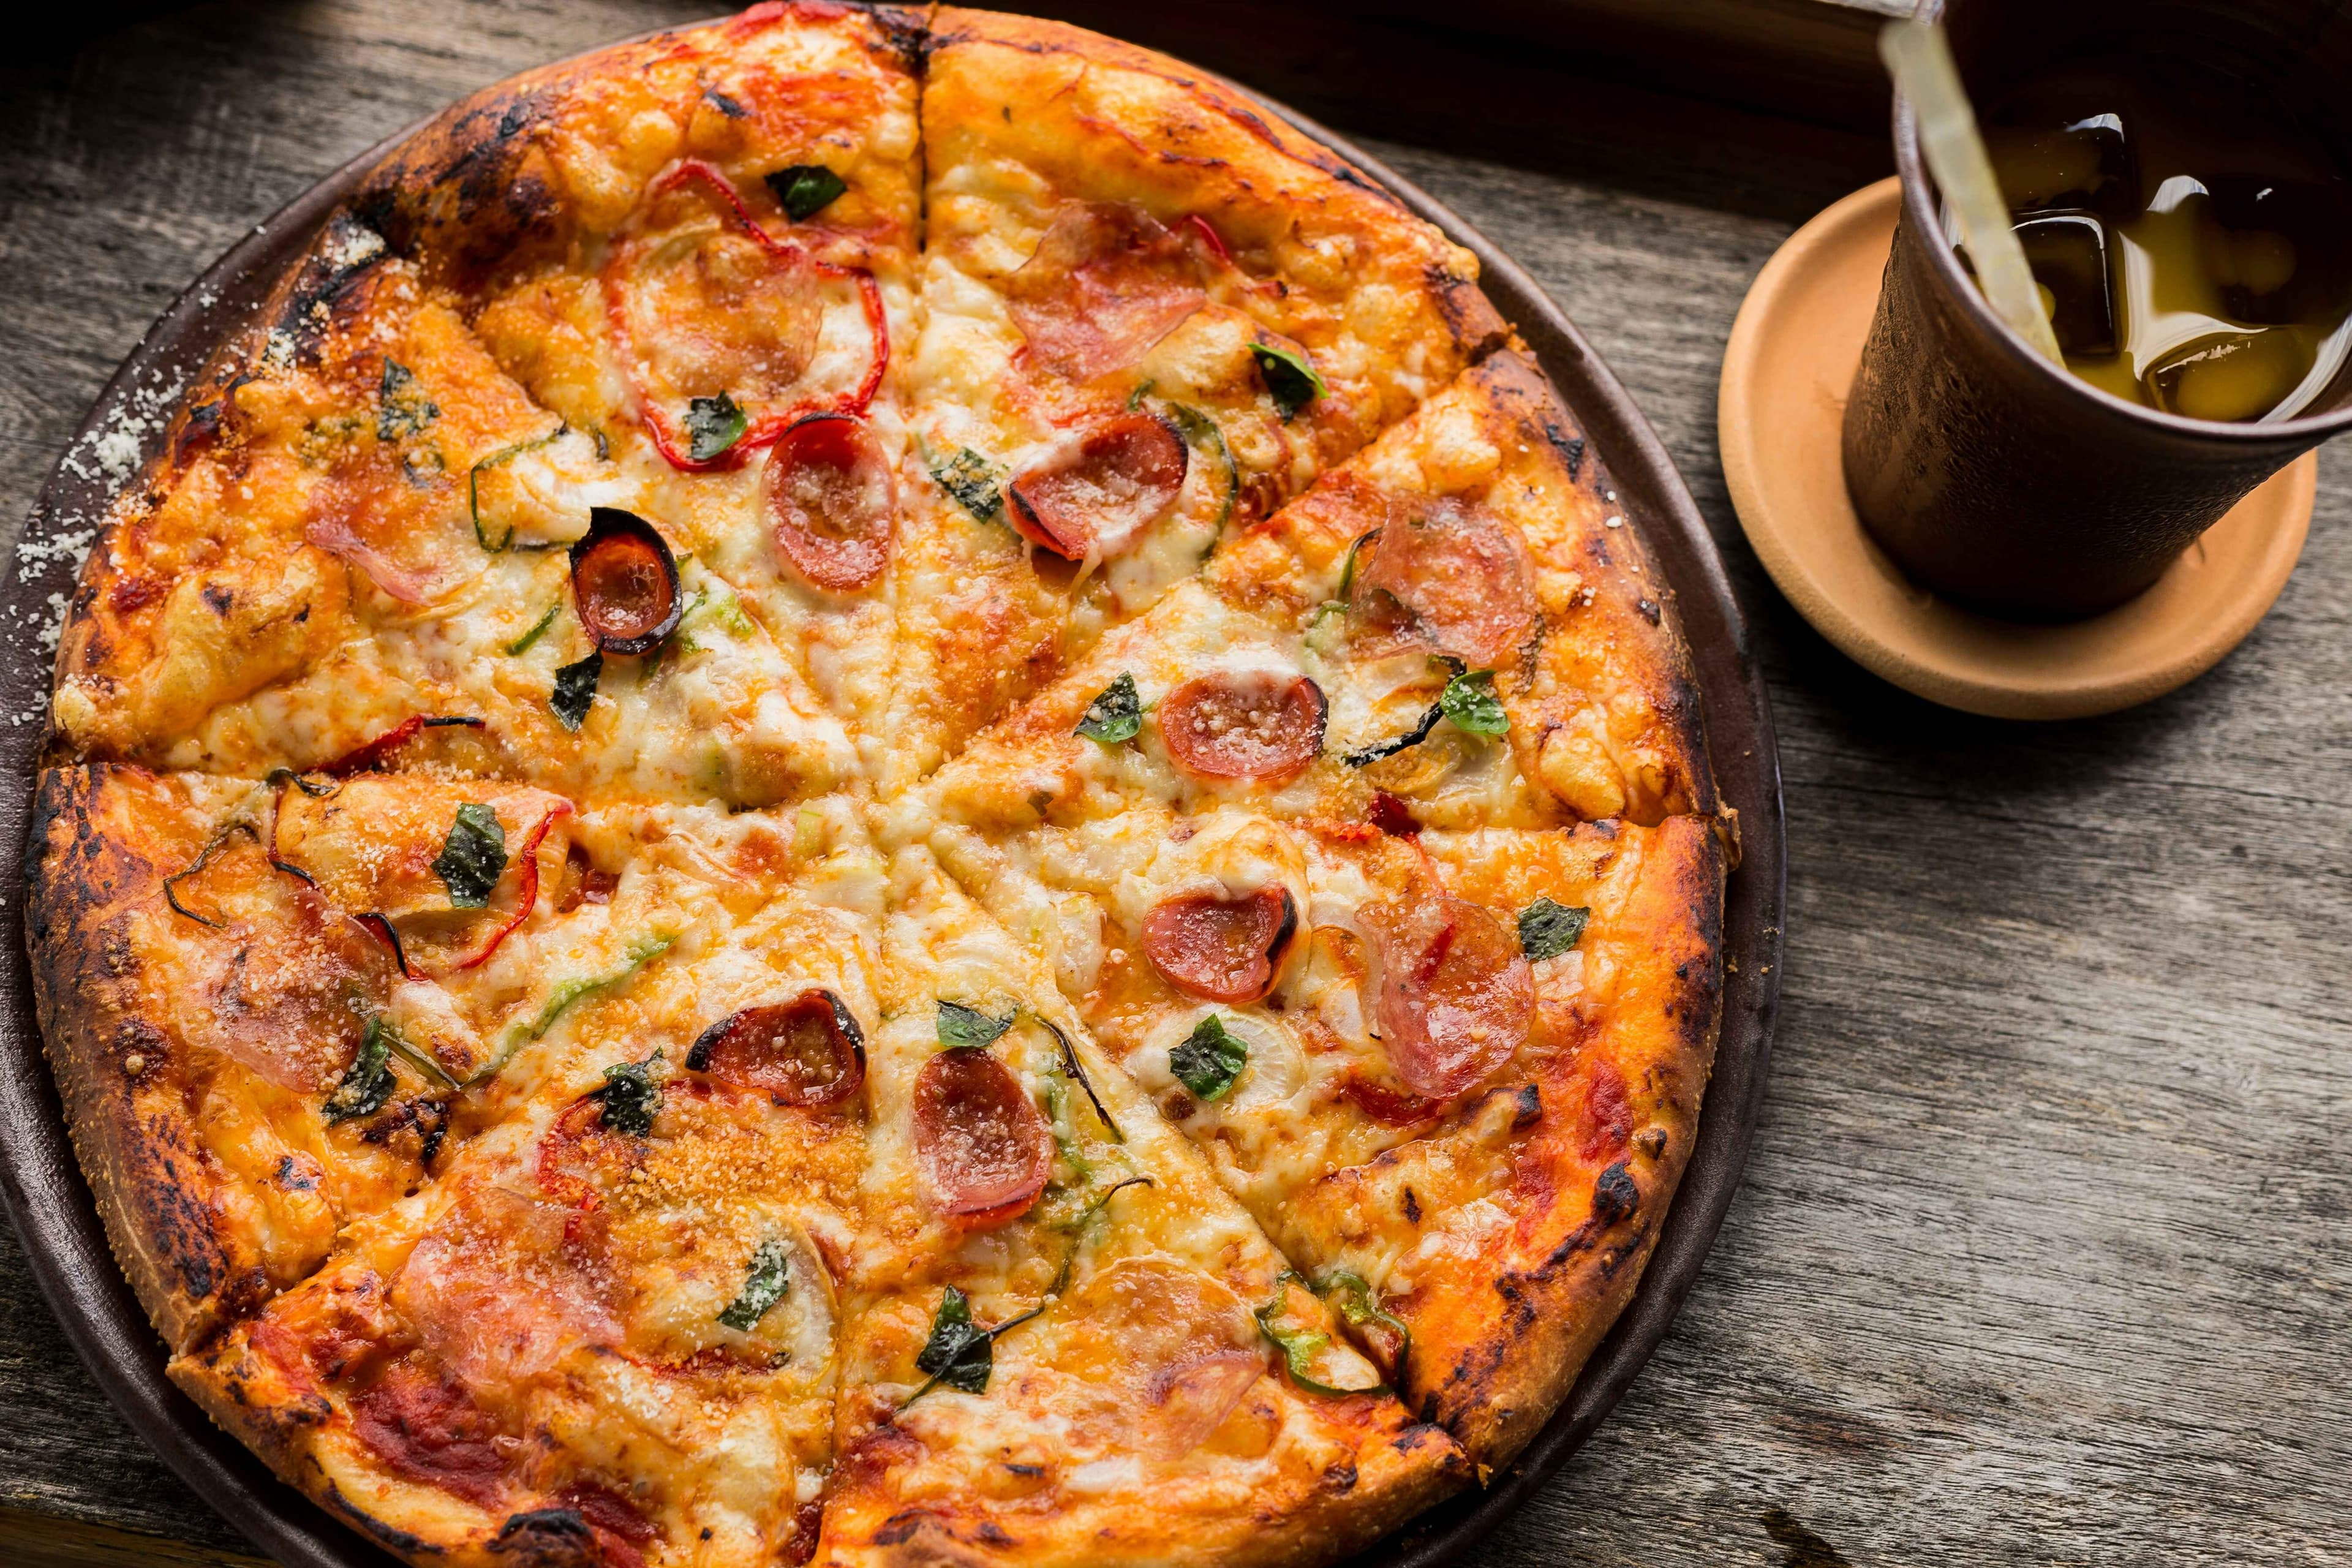 Boozy, Drunken, Spiked: Try These Heady Pizza Toppings